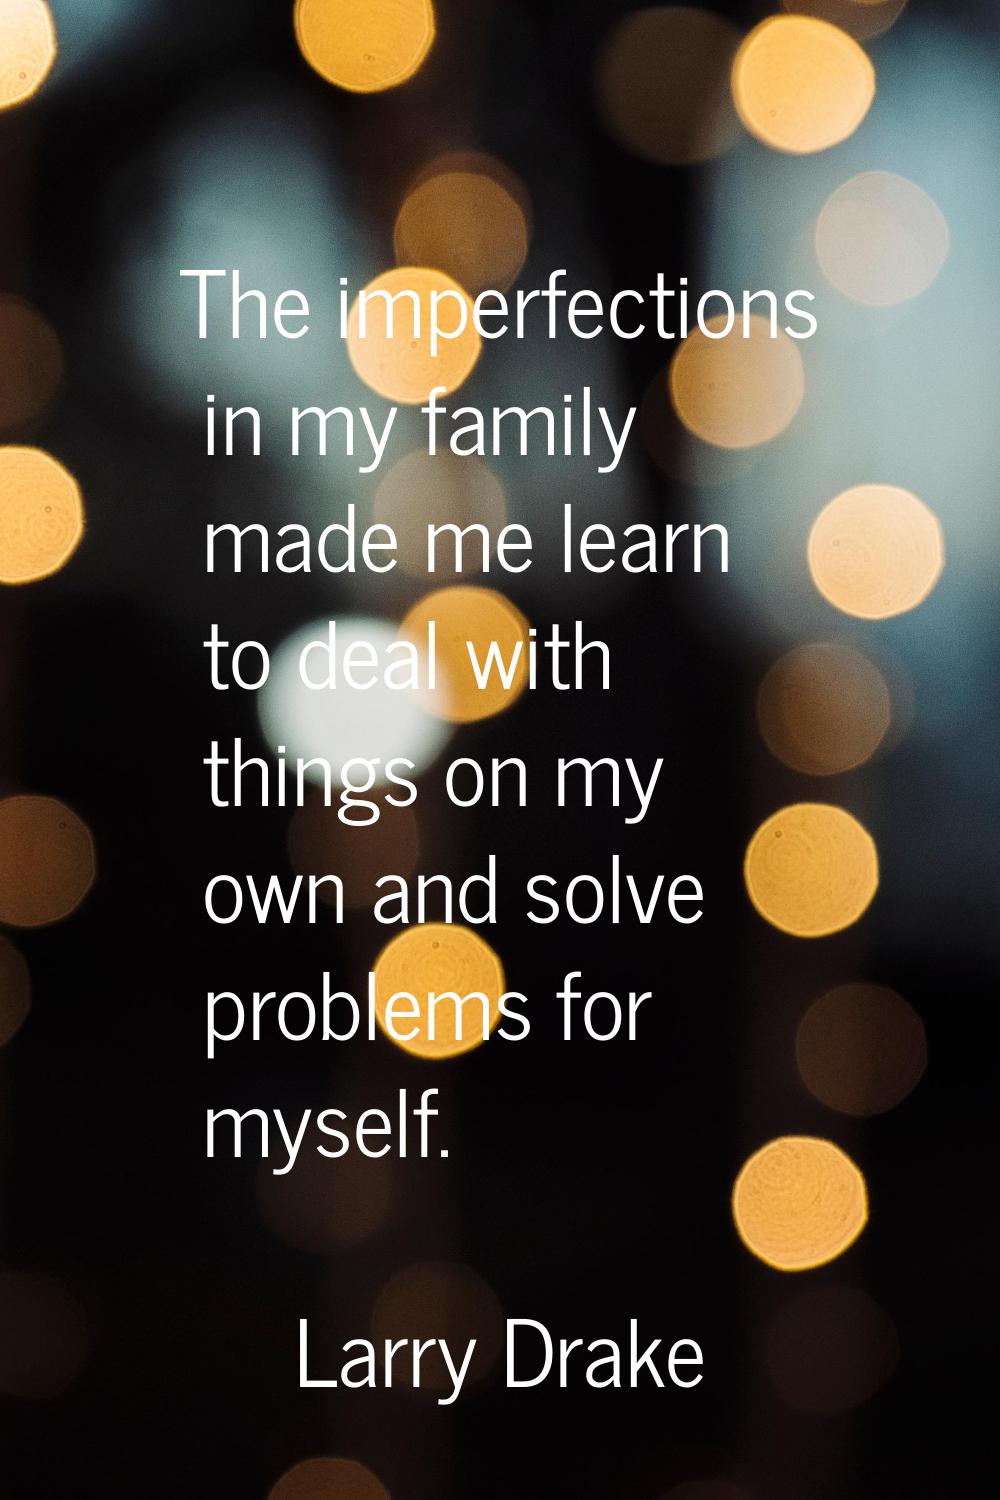 The imperfections in my family made me learn to deal with things on my own and solve problems for m